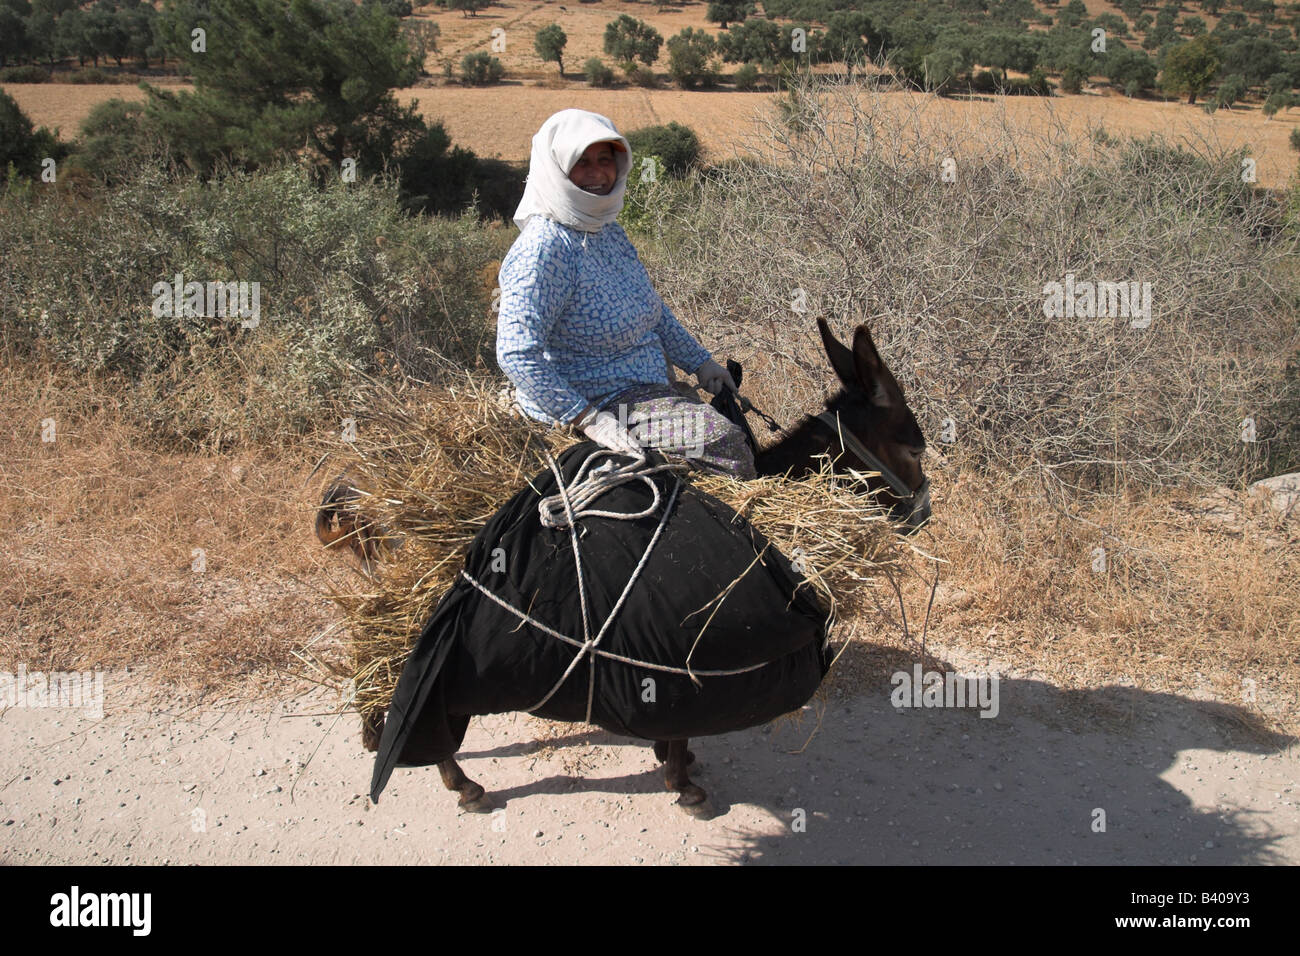 Turkish women on a donkey laden with a bundle of straw in rural countryside near Bodrum, Turkey Stock Photo